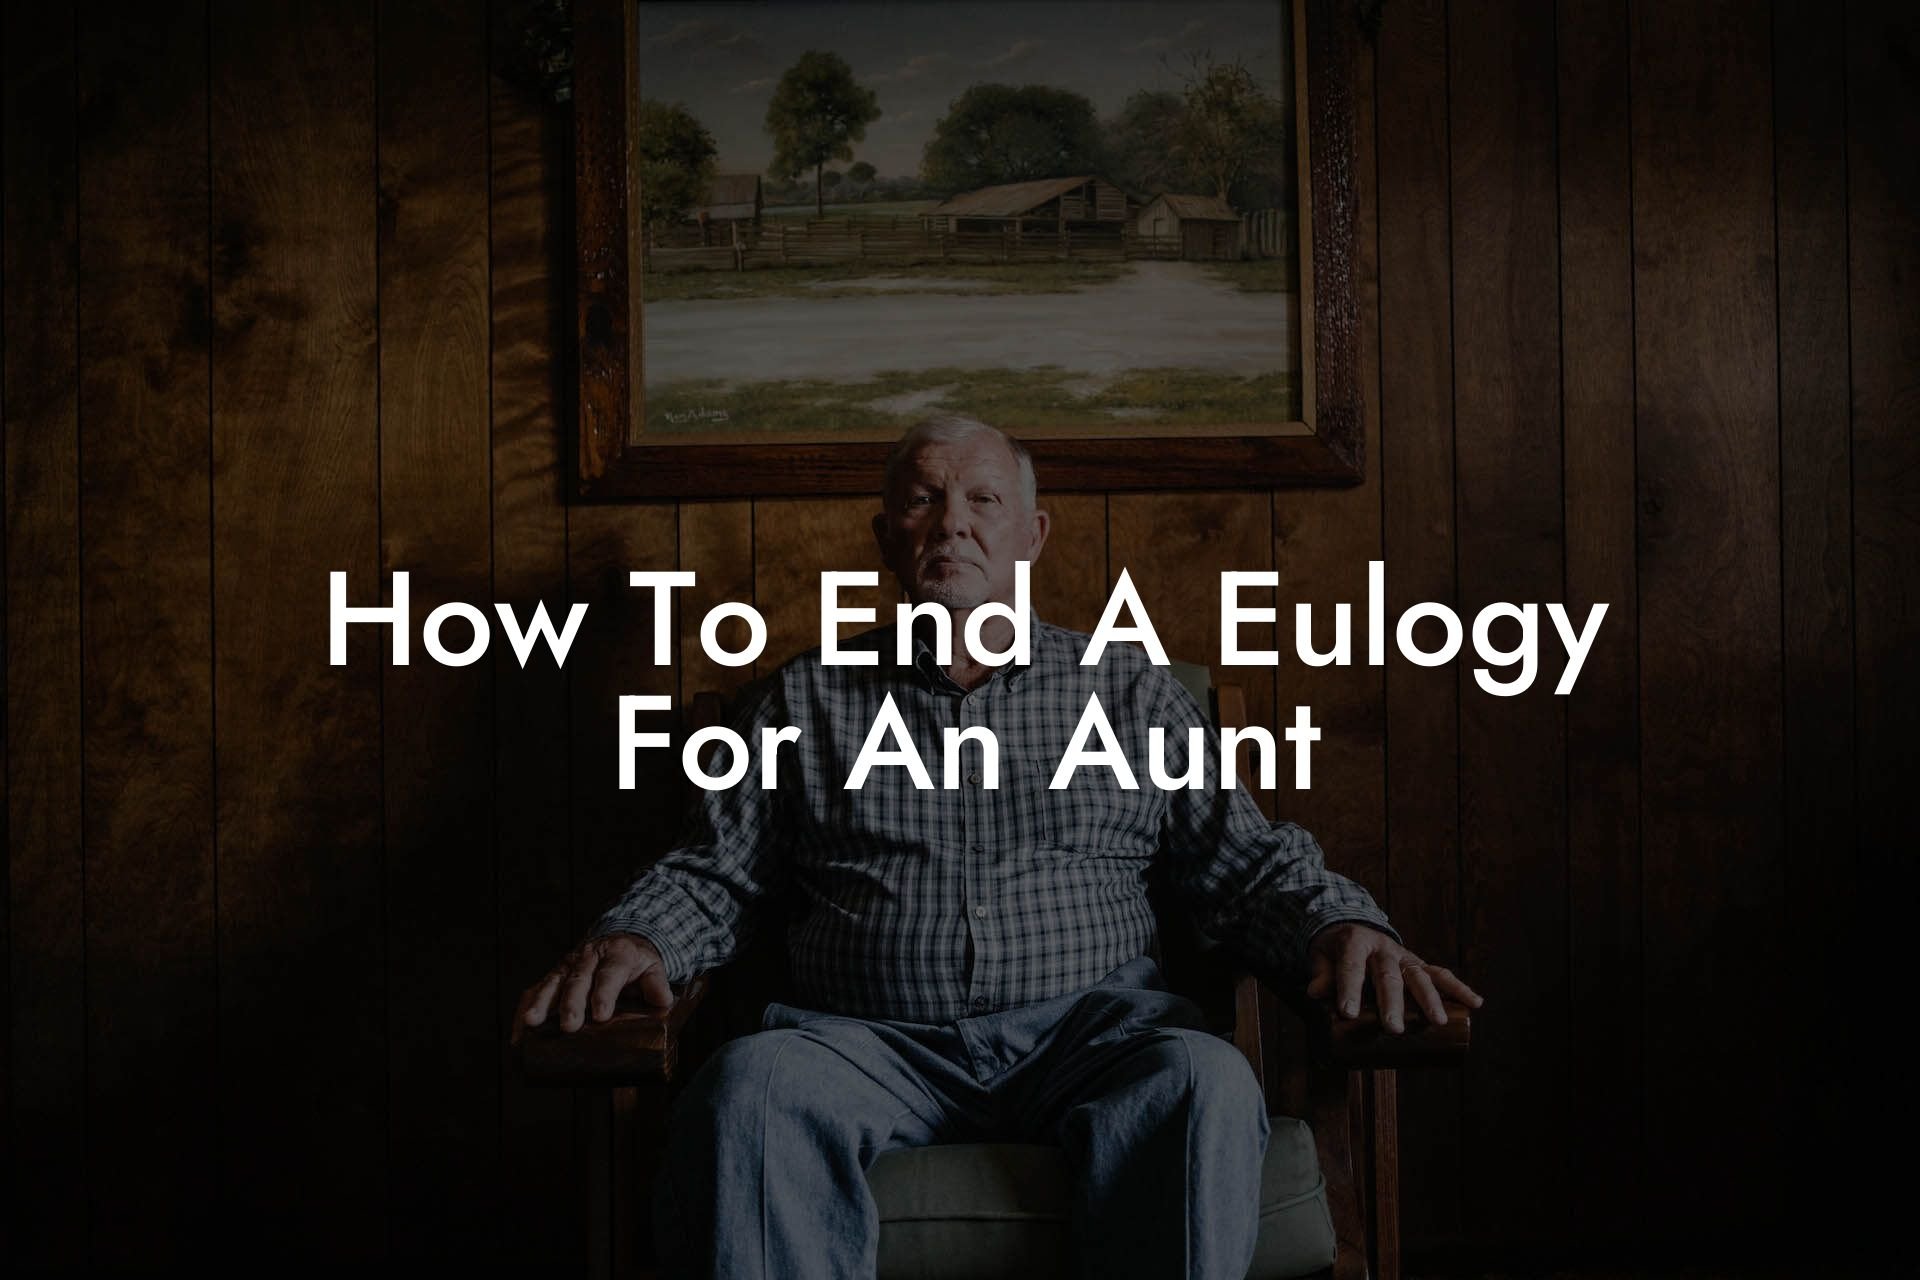 How To End A Eulogy For An Aunt